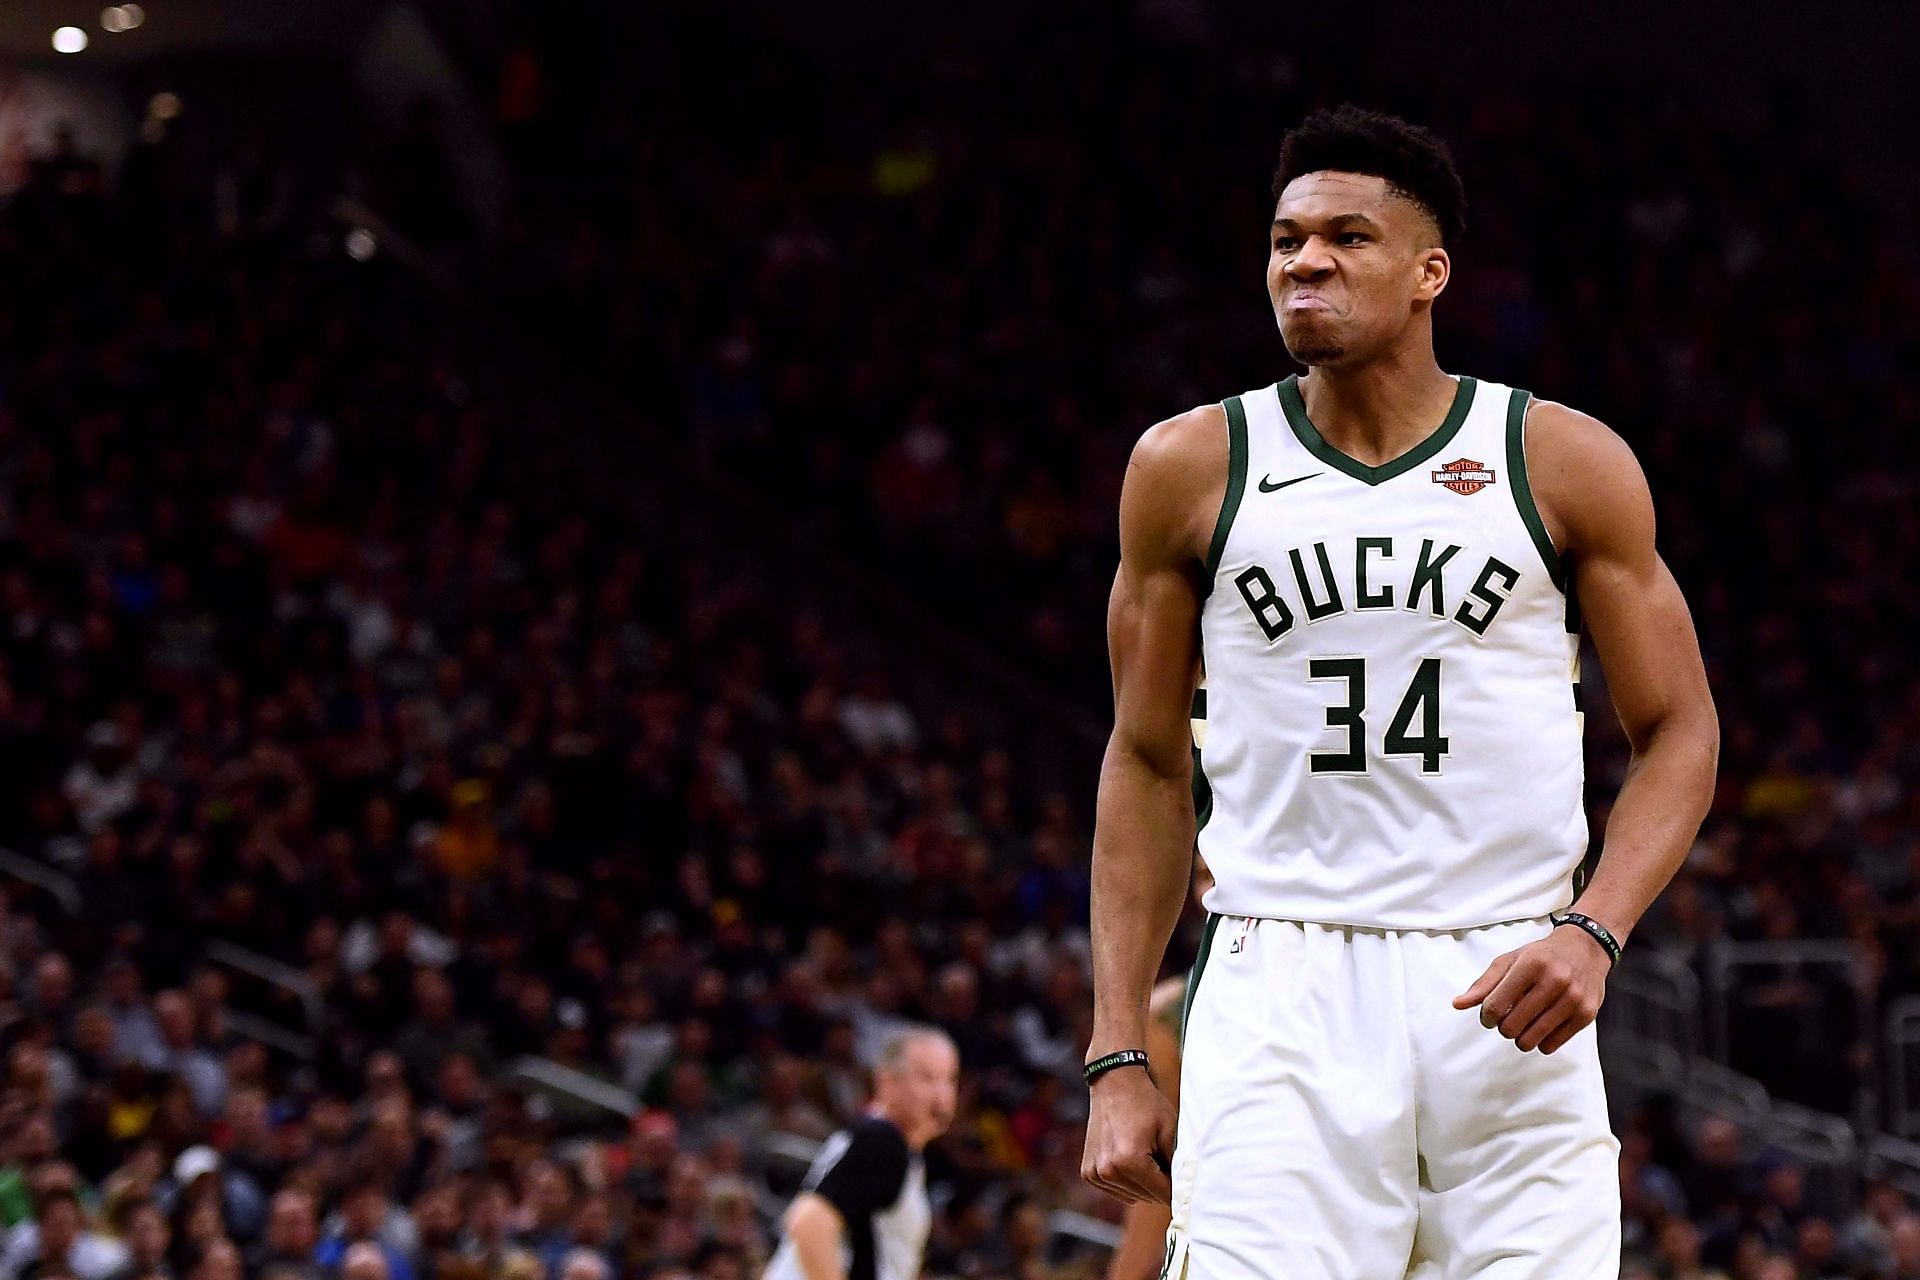 Giannis Antetokounmpo of the Milwaukee Bucks is the highest-rated player in NBA 2K23